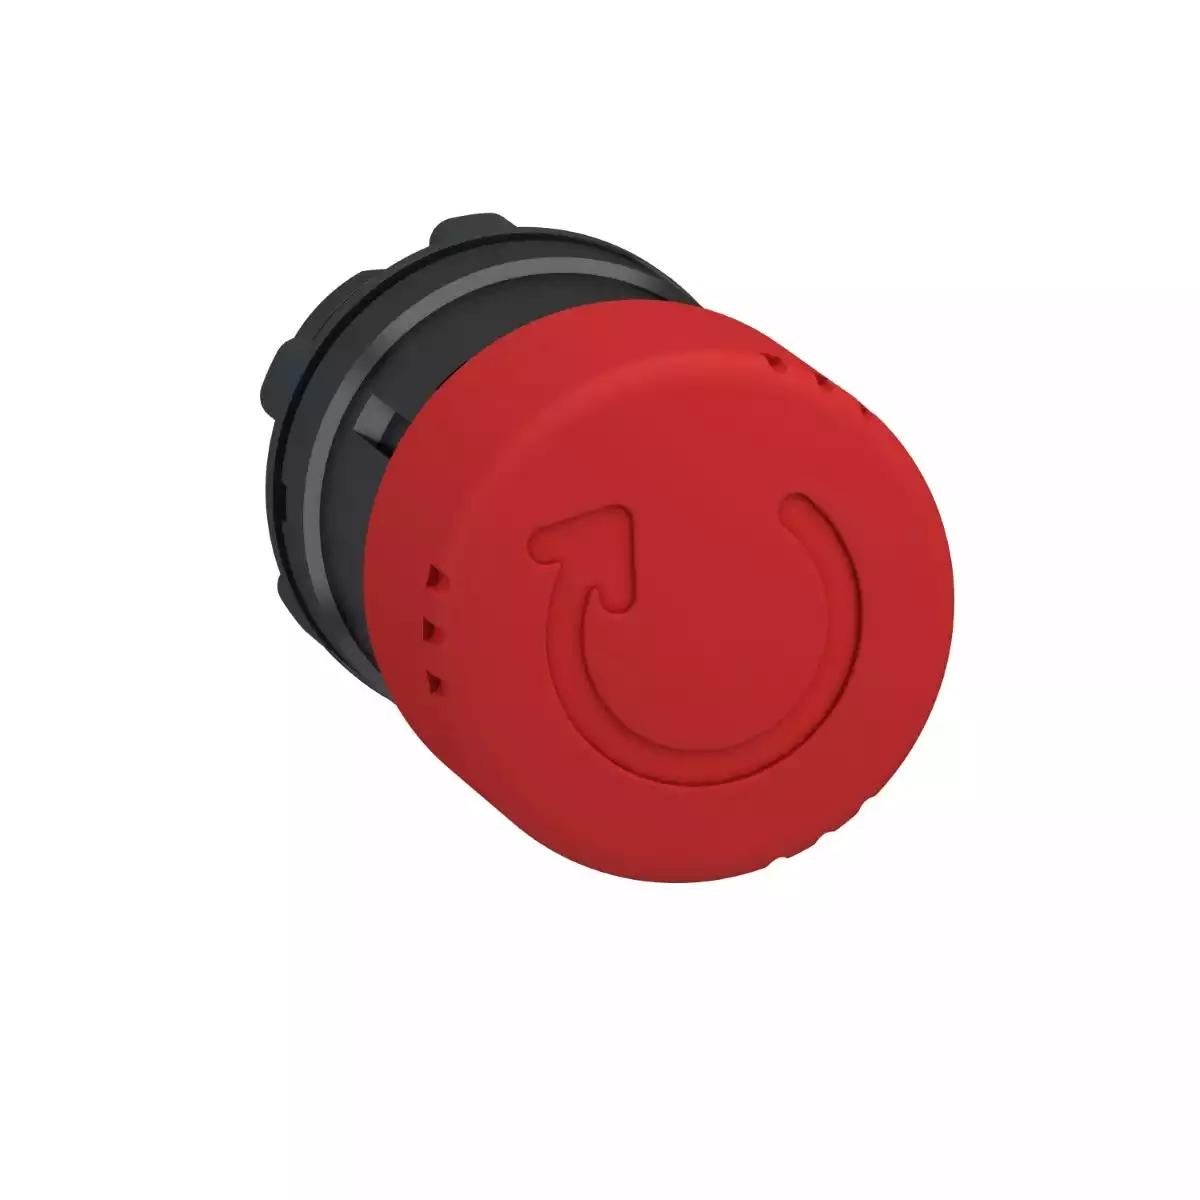 Emergency stop head, Harmony XB4, switching off, black metal, red mushroom 30mm, 22mm, trigger latching turn to release